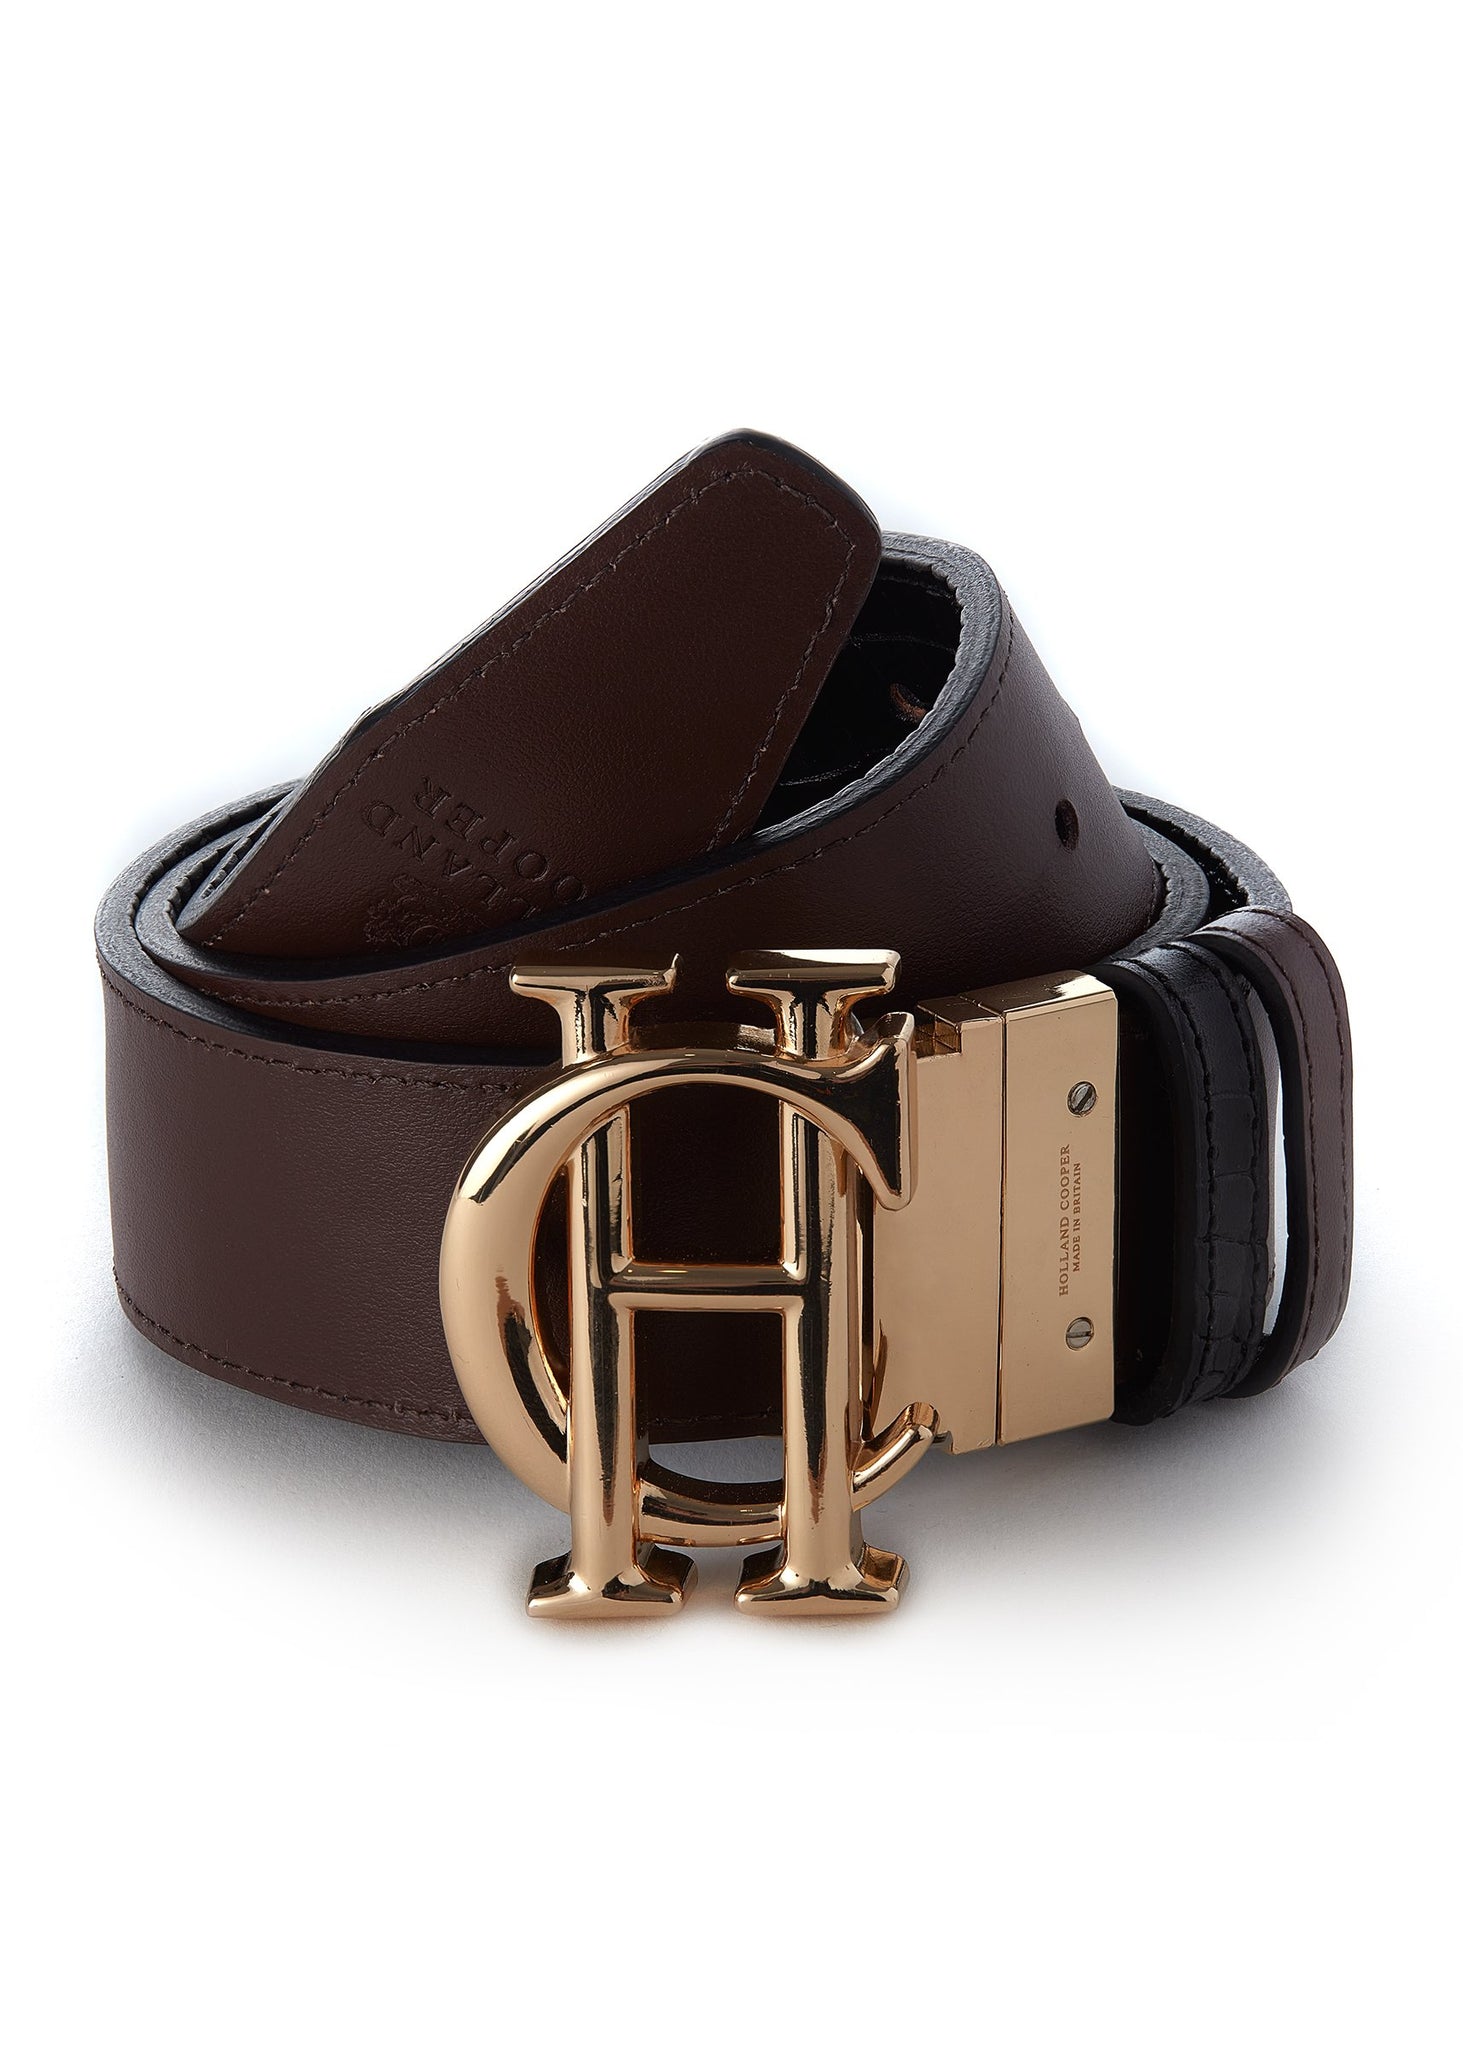 genuine leather reversible belt with chocolate on one side and black croc on the other featuring large gold hc belt fastening and 2 belt loops in both colours